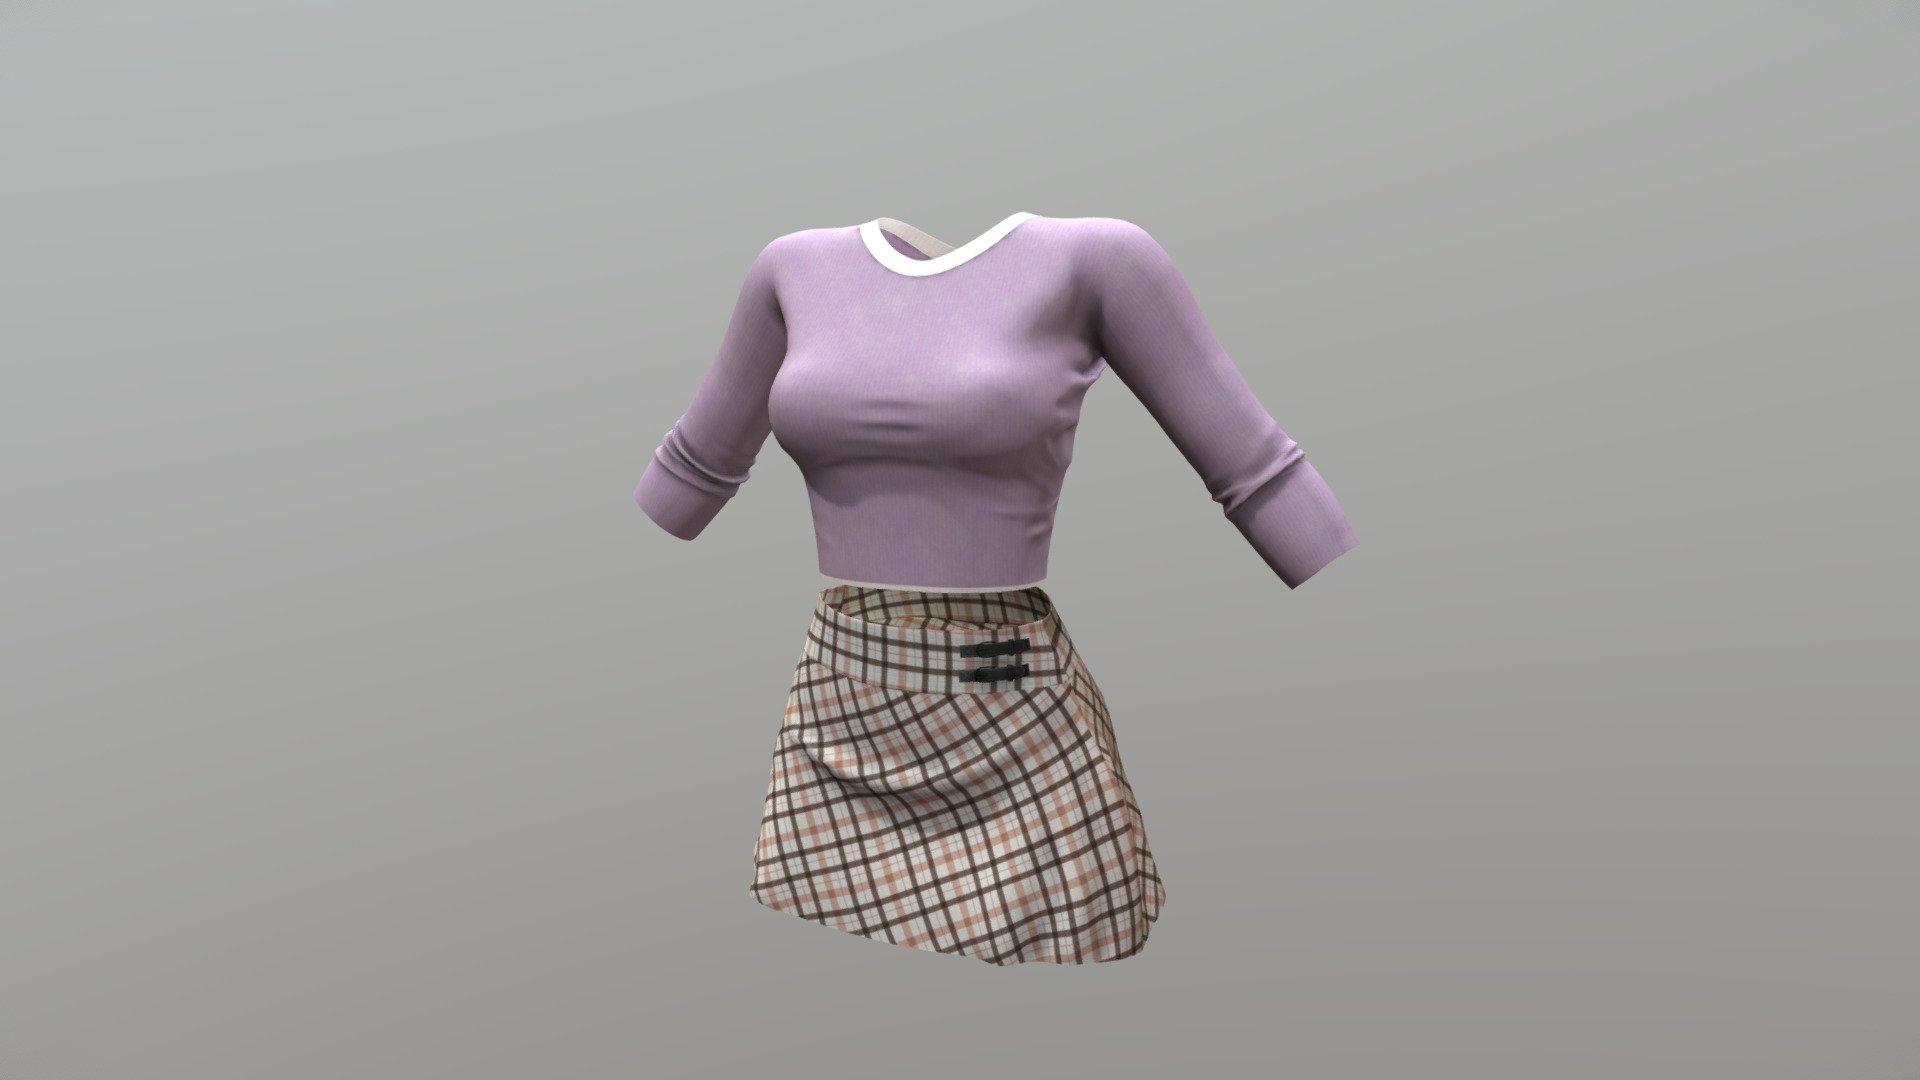 Skirt + Top

Can be fitted to any character

Clean topology

No overlapping smart optimum unwrapped UVs

High-quality realistic textures

FBX, OBJ, gITF, USDZ (request other formats)

PBR or Classic

Please ask any other questions.

Type     user:3dia &ldquo;search term